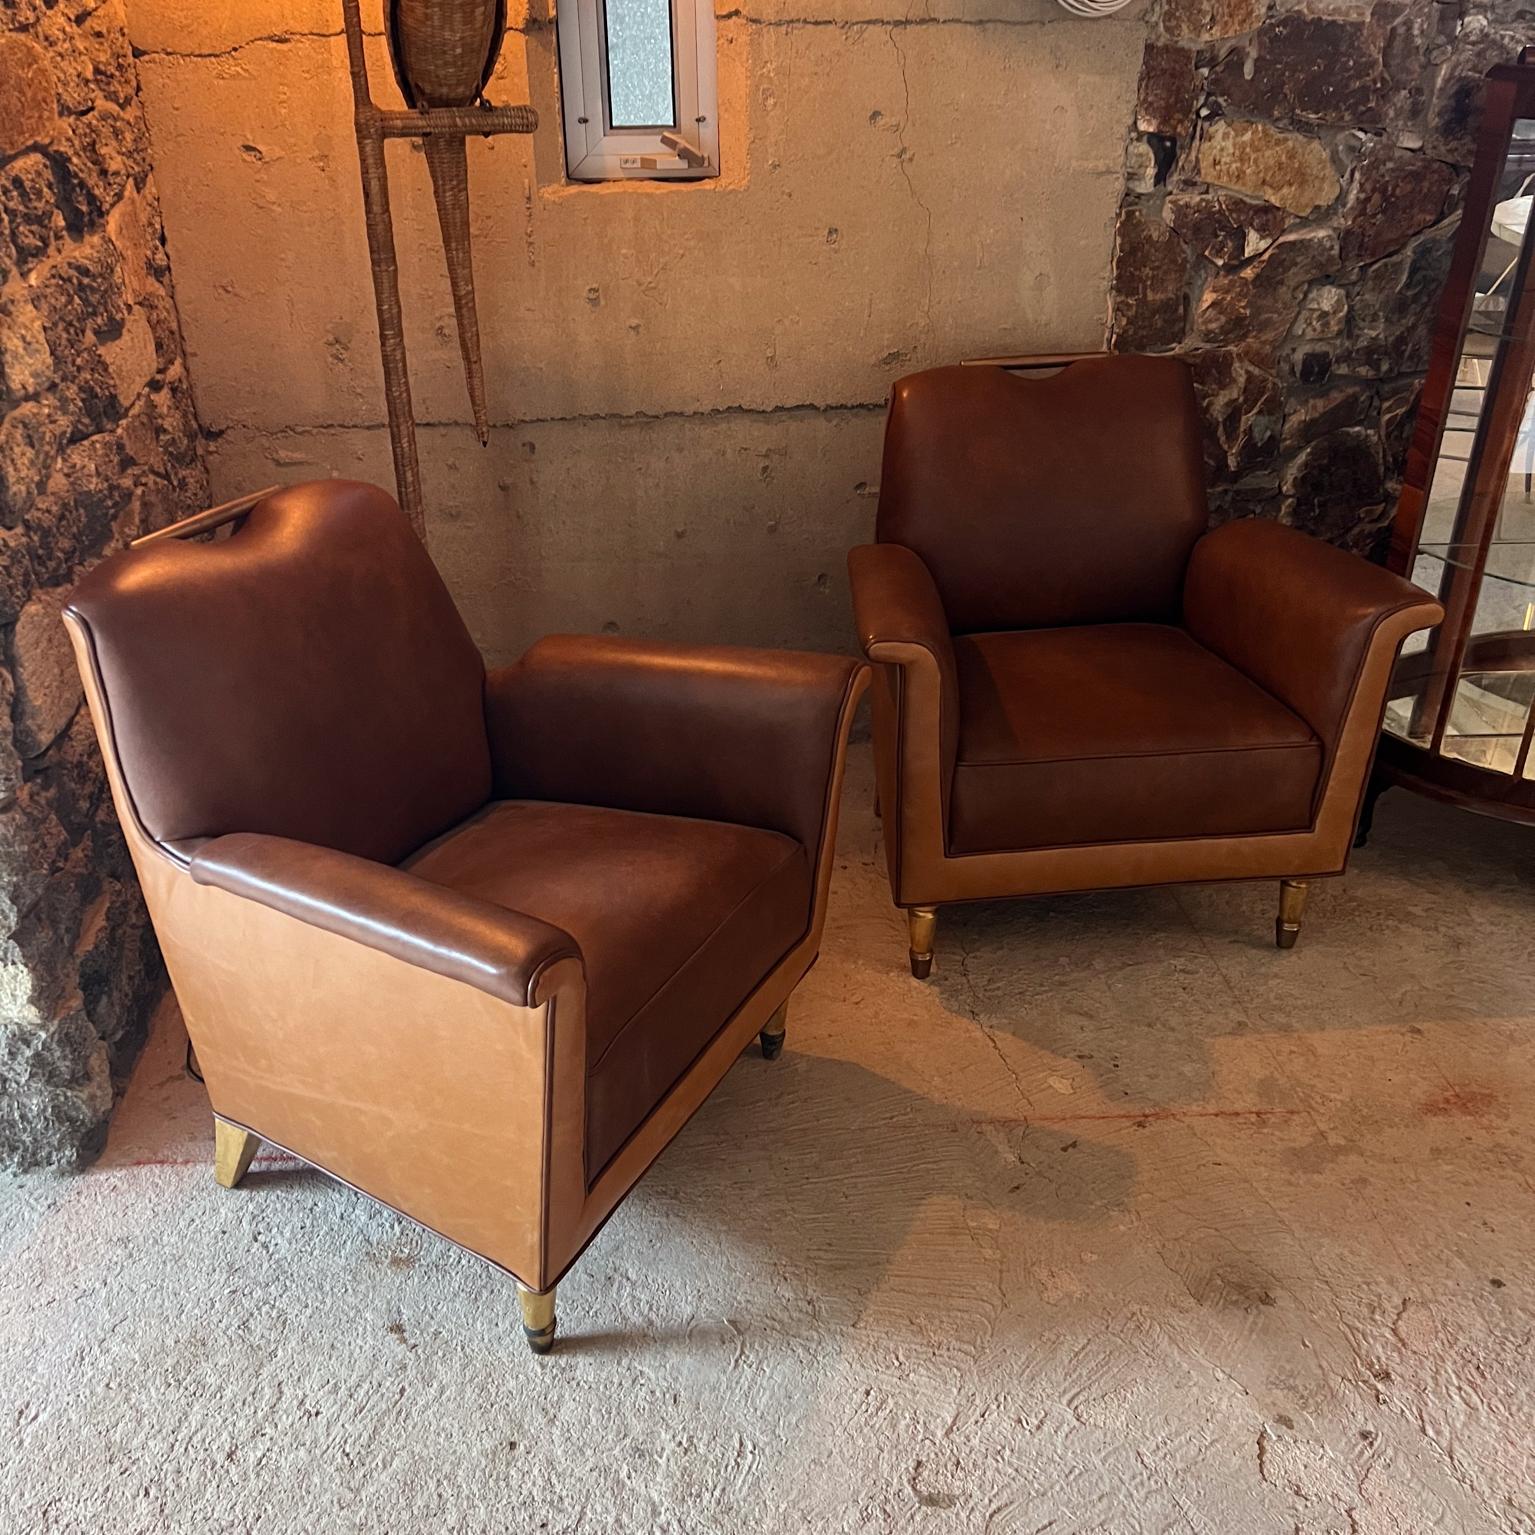 Mid-Century Modern 1950s Octavio Vidales Chairs Leather and Mahogany Mexico City For Sale